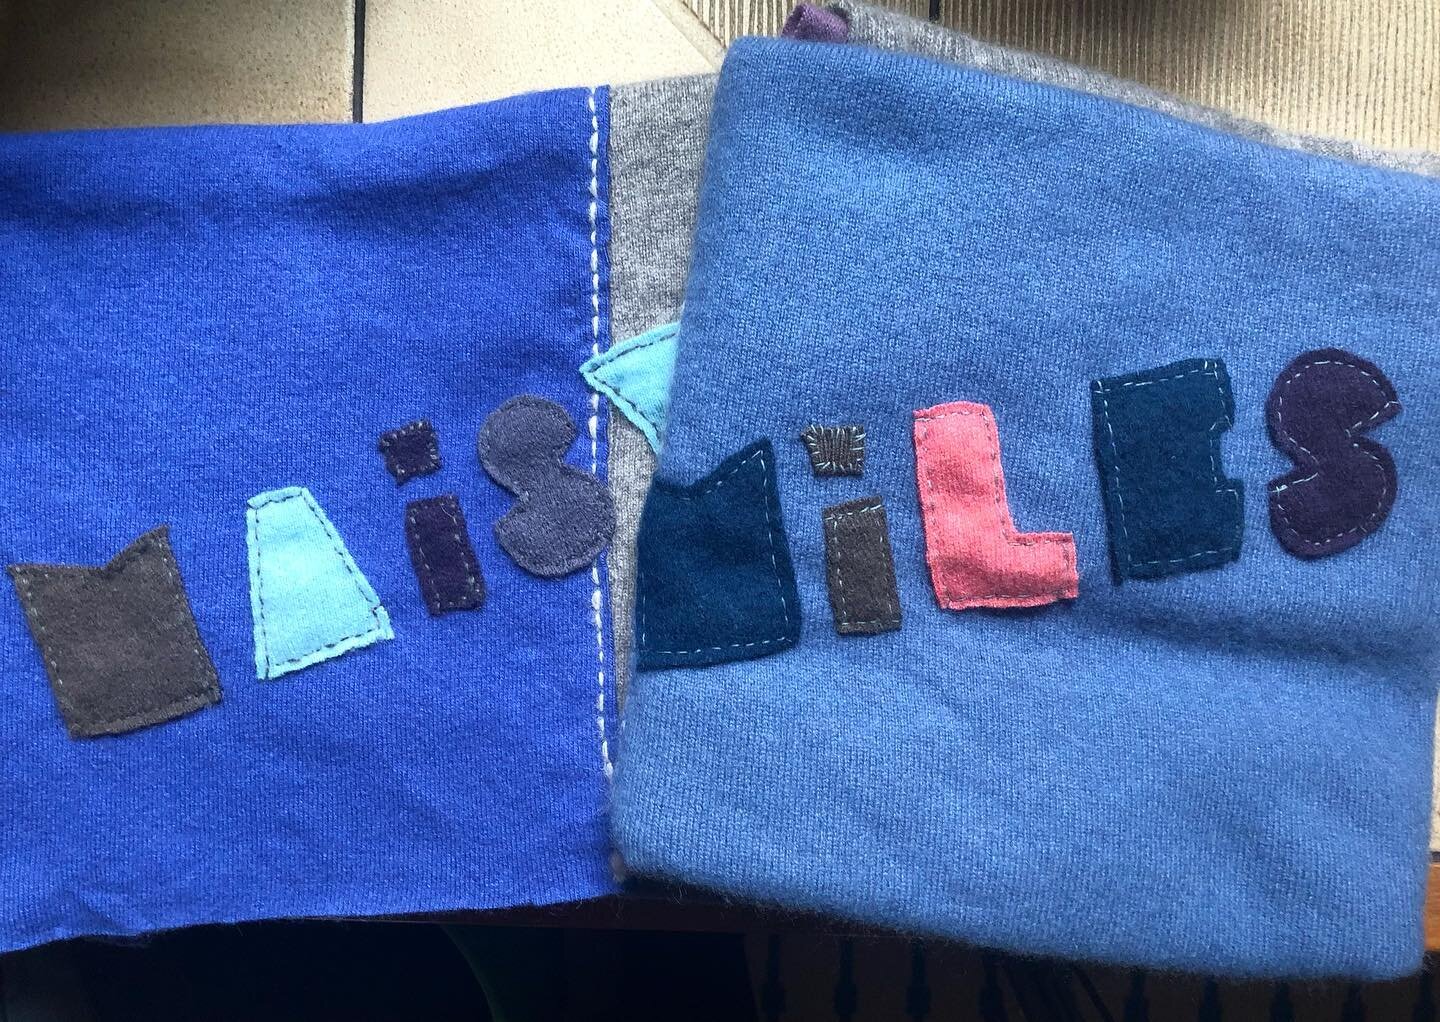 Cashmere Baby Blanket special order complete!! Miles and Maisy are living in luxury thanks to my lovely friend, and supporter of the arts @jamesbyrong 💗💗💗 #cashmereeverything DM for inquiries ;)